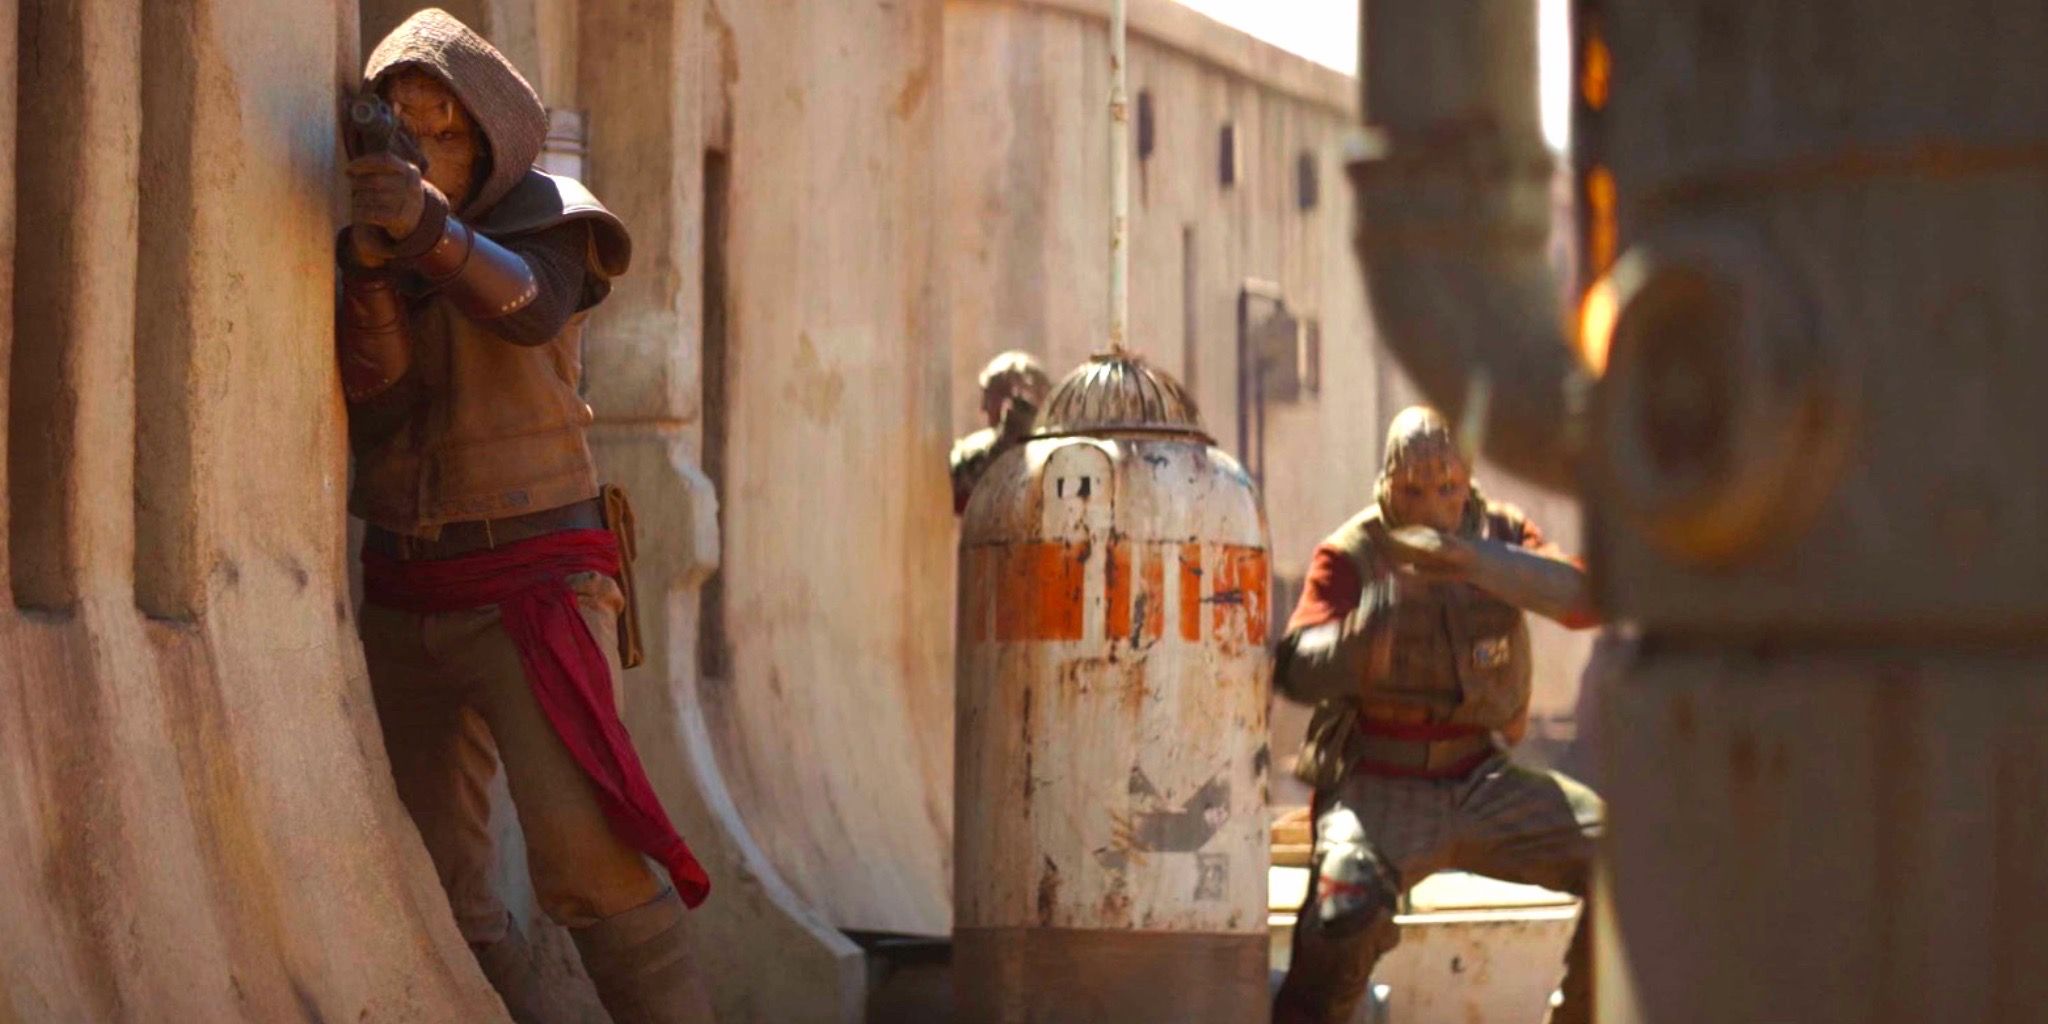 A band of Niktos protects Grogu at the encampment on Arvala-7 in The Mandalorian season 1 episode 1